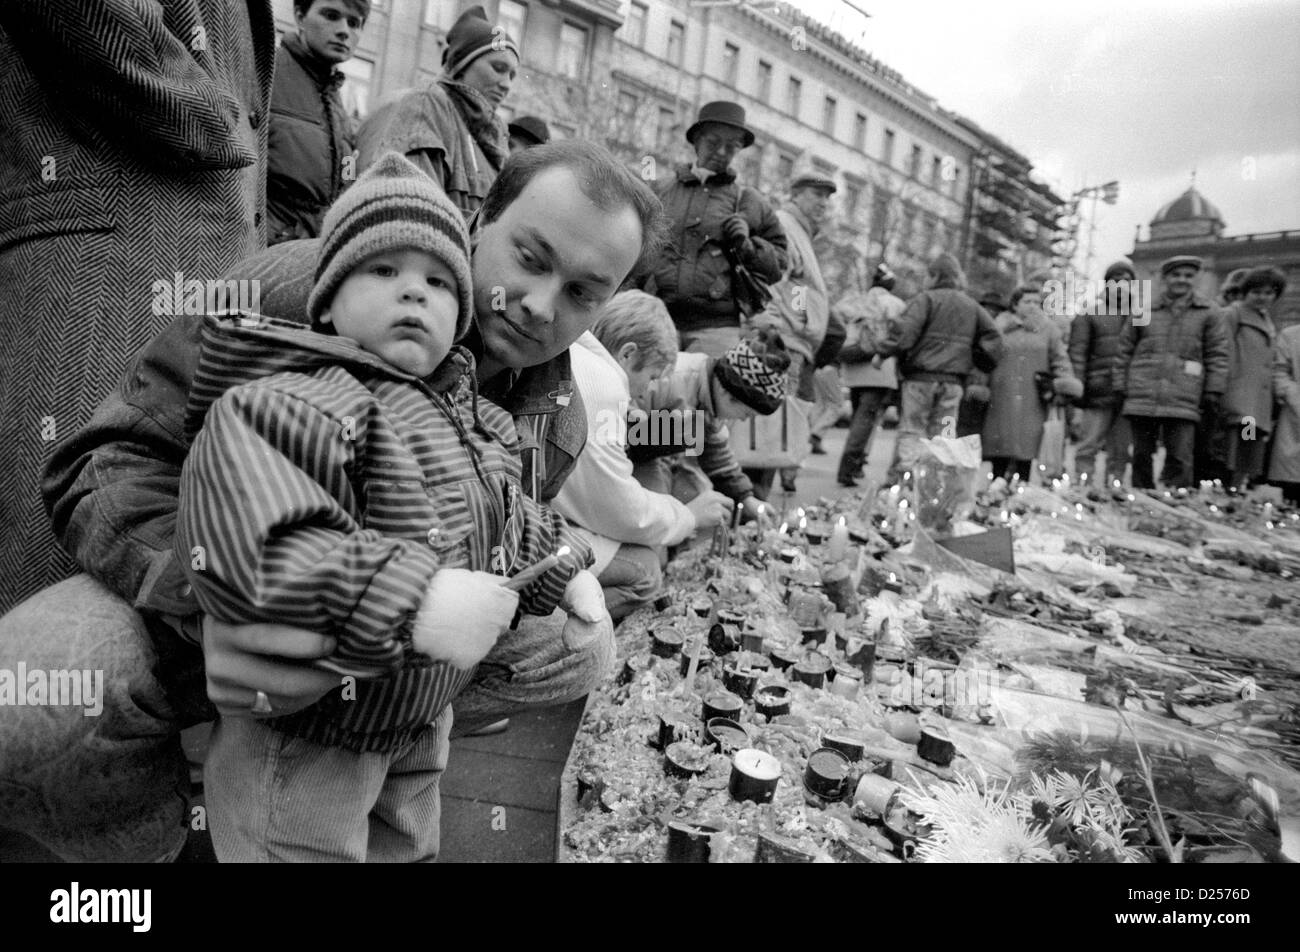 November 1989 Father and child lighting a candle in Wenceslas Square, Prague, Czech Republic to mark the fall of communism. Stock Photo